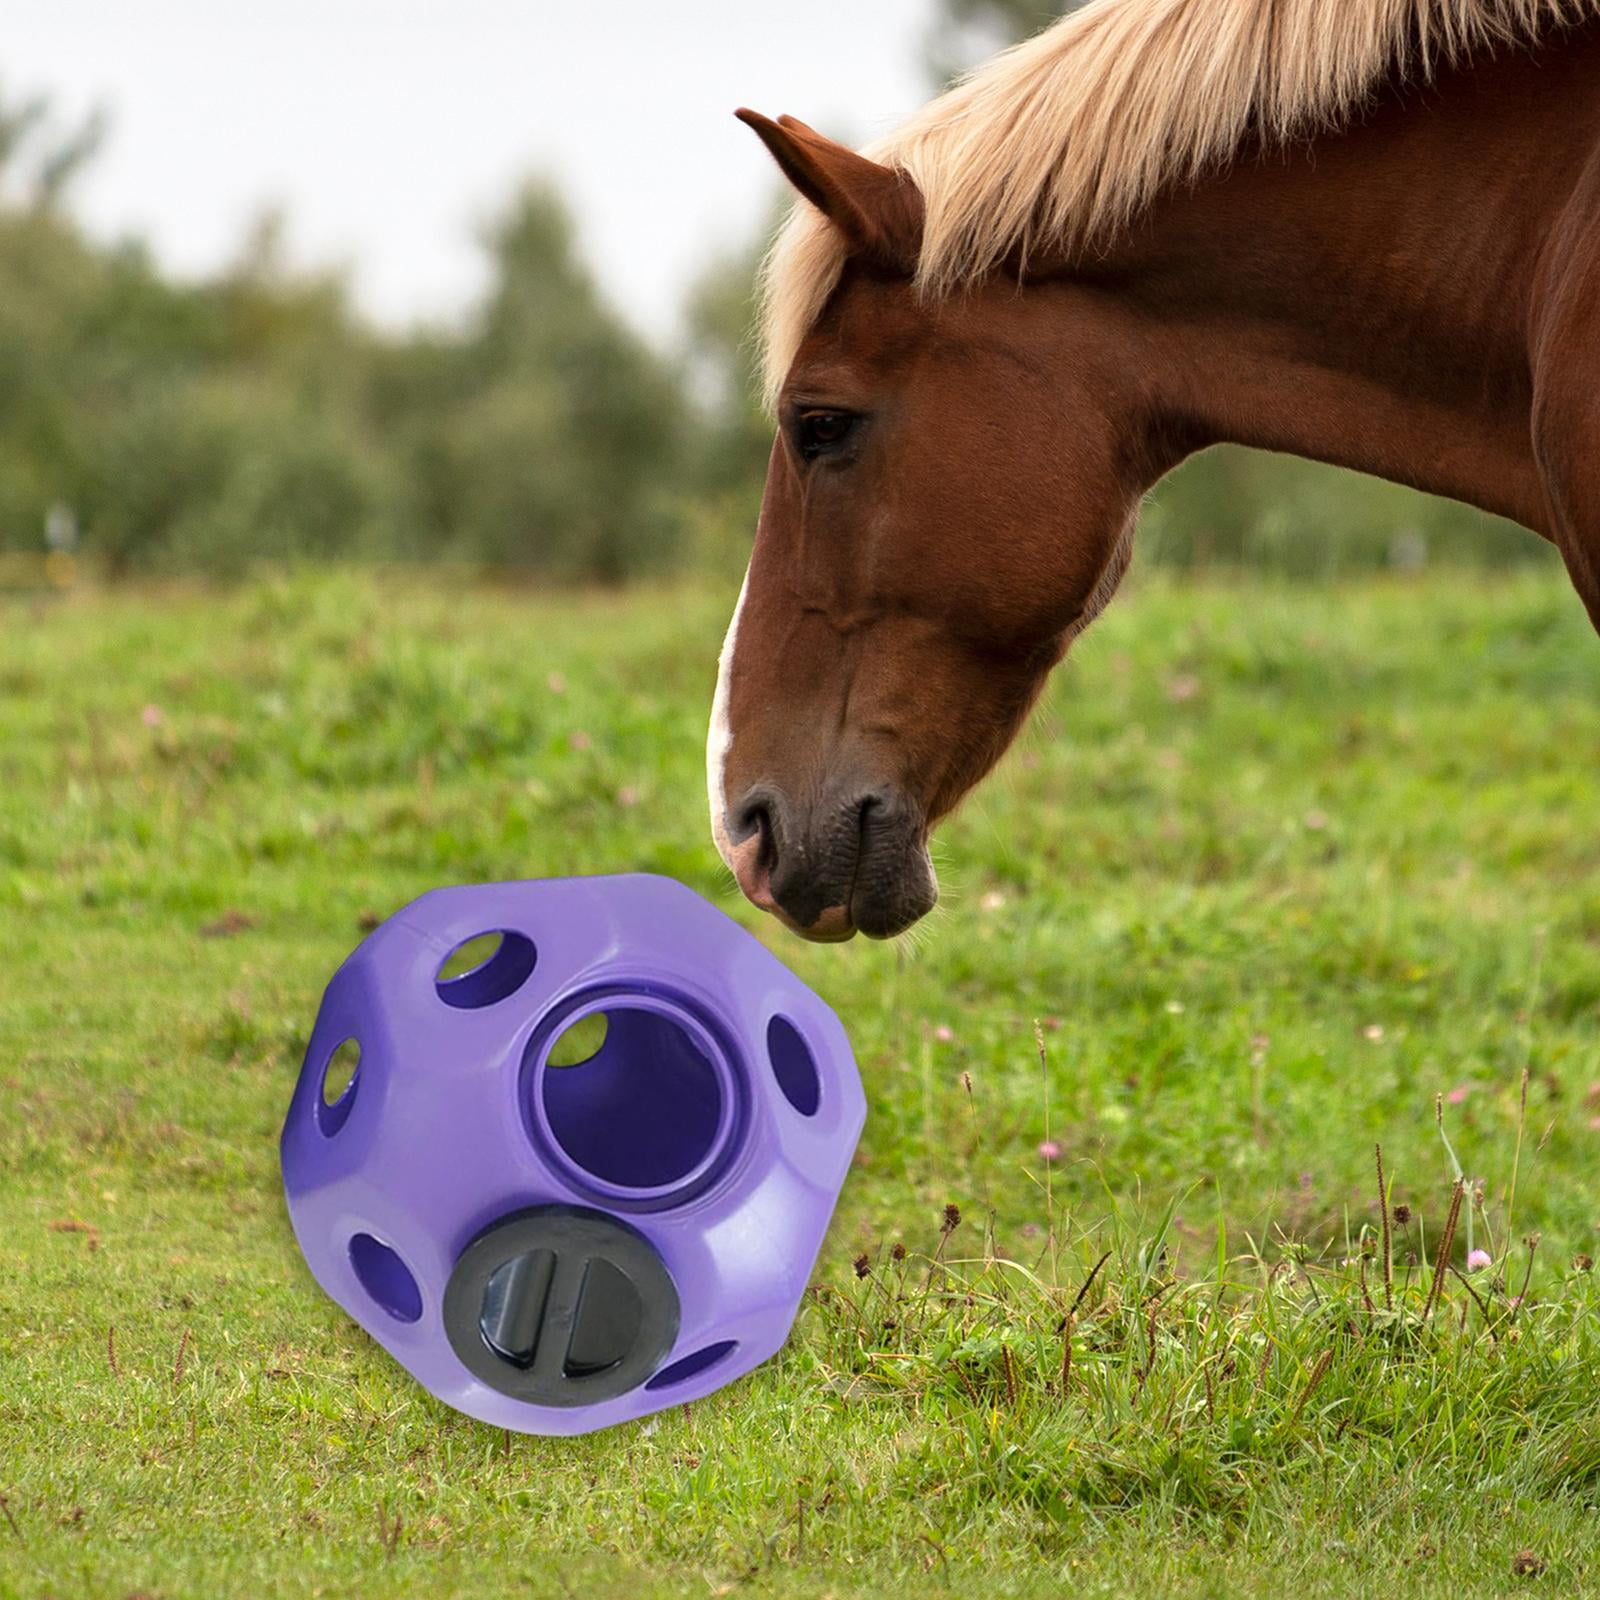 Horse Treat Ball Hay Feeder Toy For